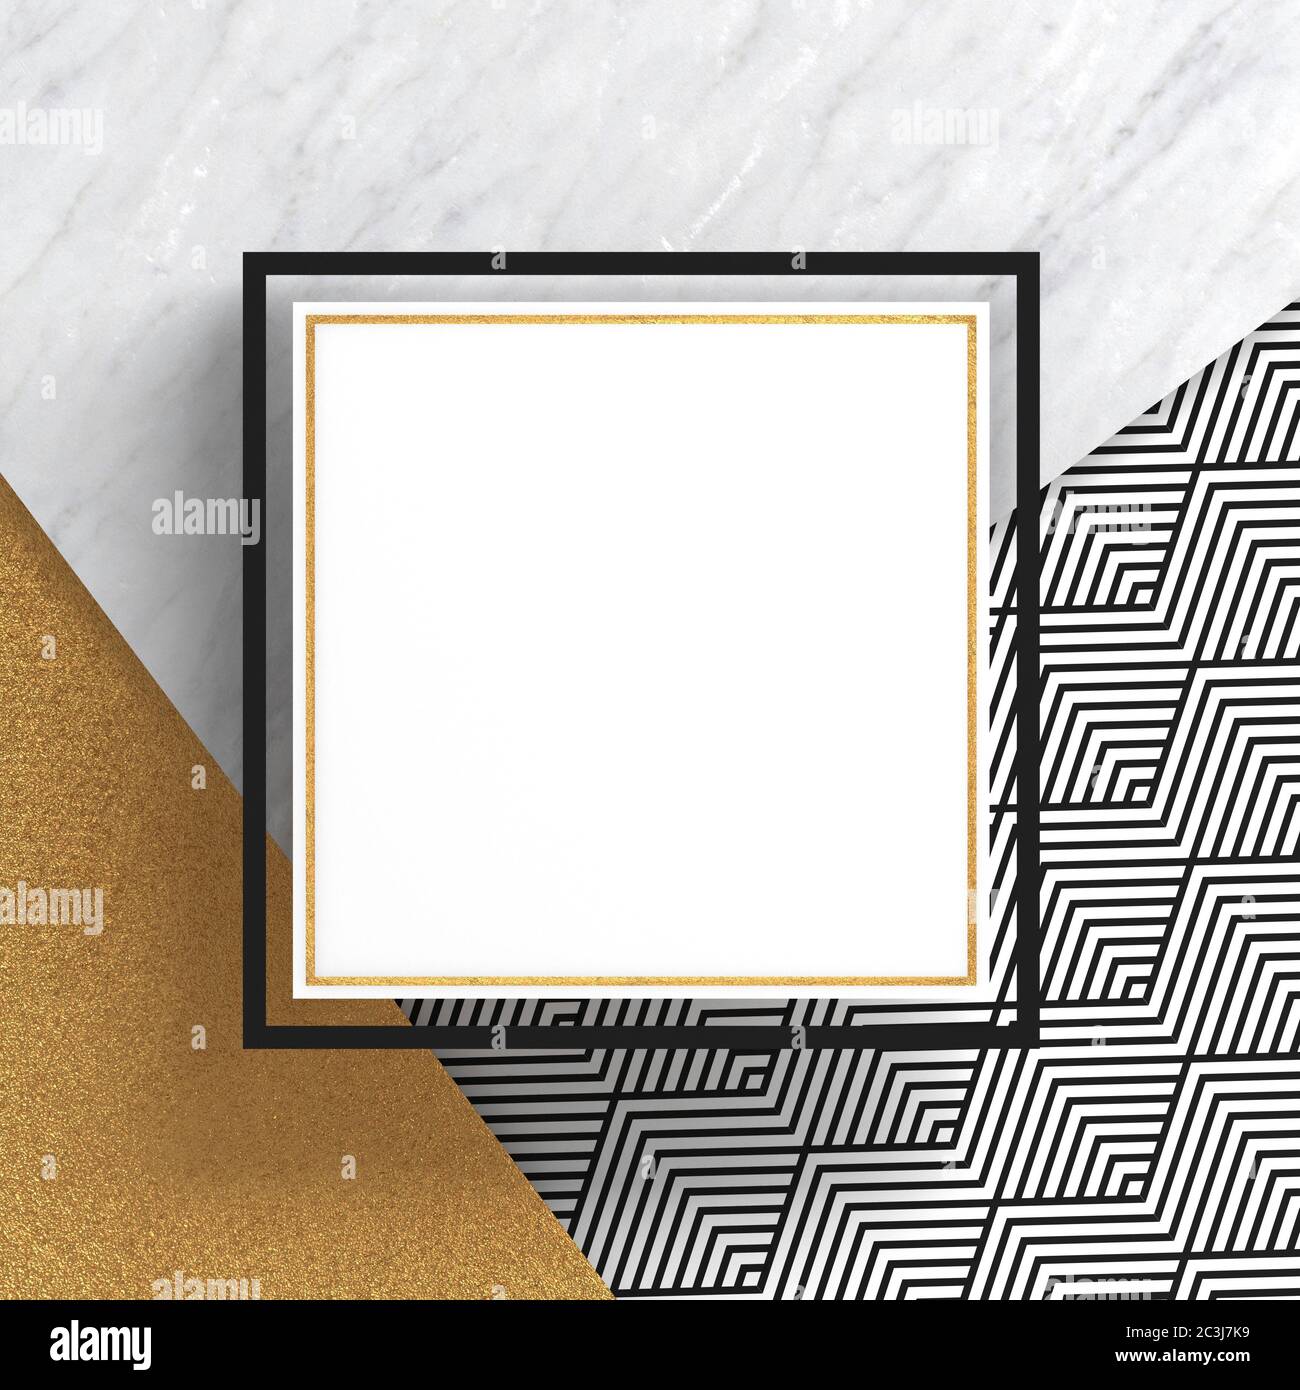 A square border frame on white marble stone and gold surface with a zigzag pattern on white background. Copy space. Abstract geometric composition. 3D Stock Photo